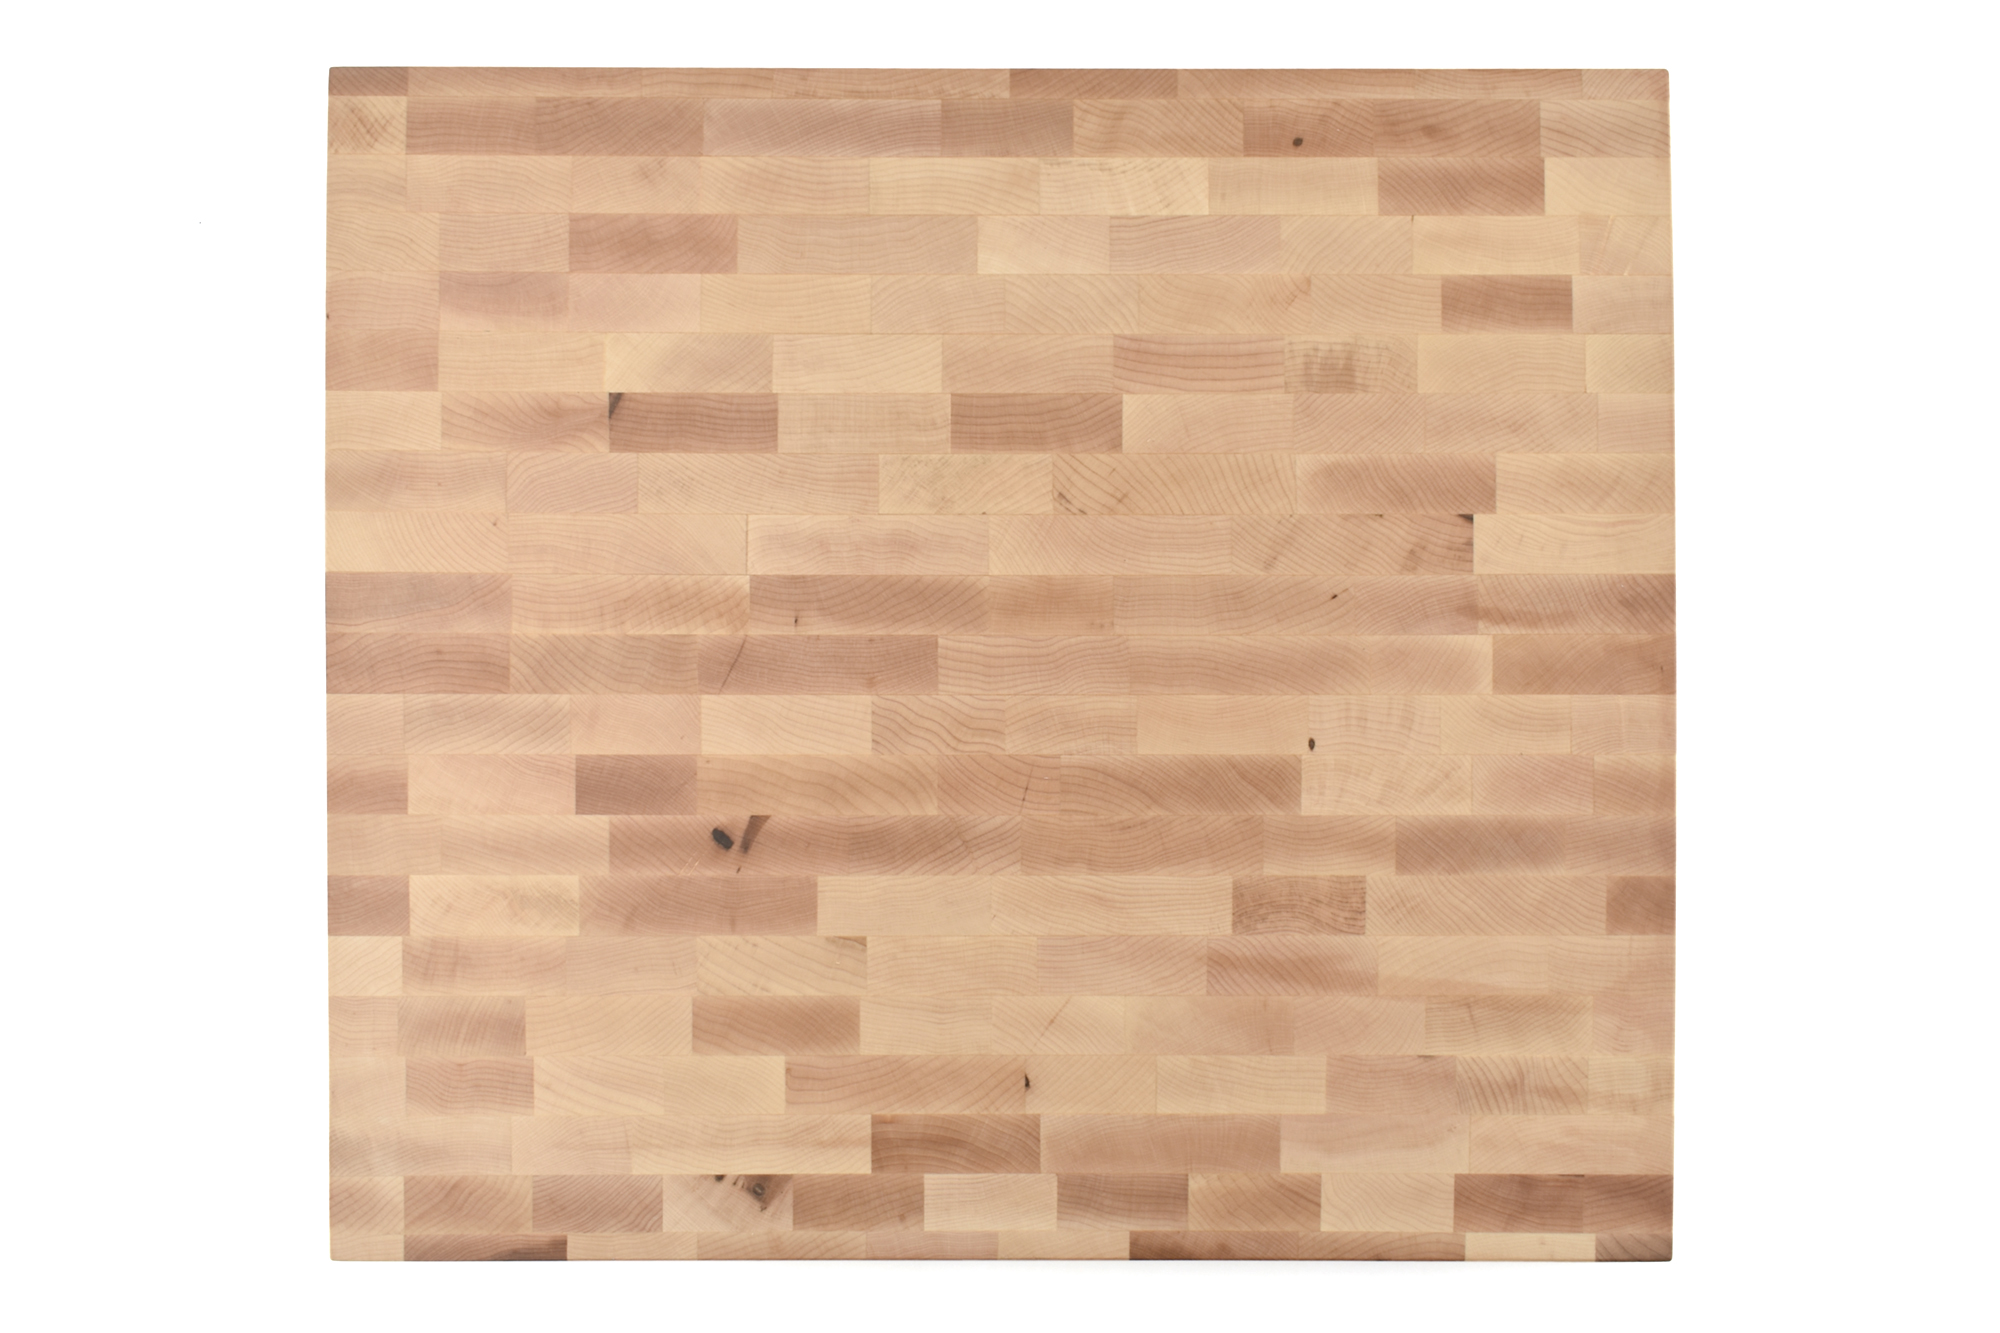 Large Maple End grain butcher block with side handle indents 